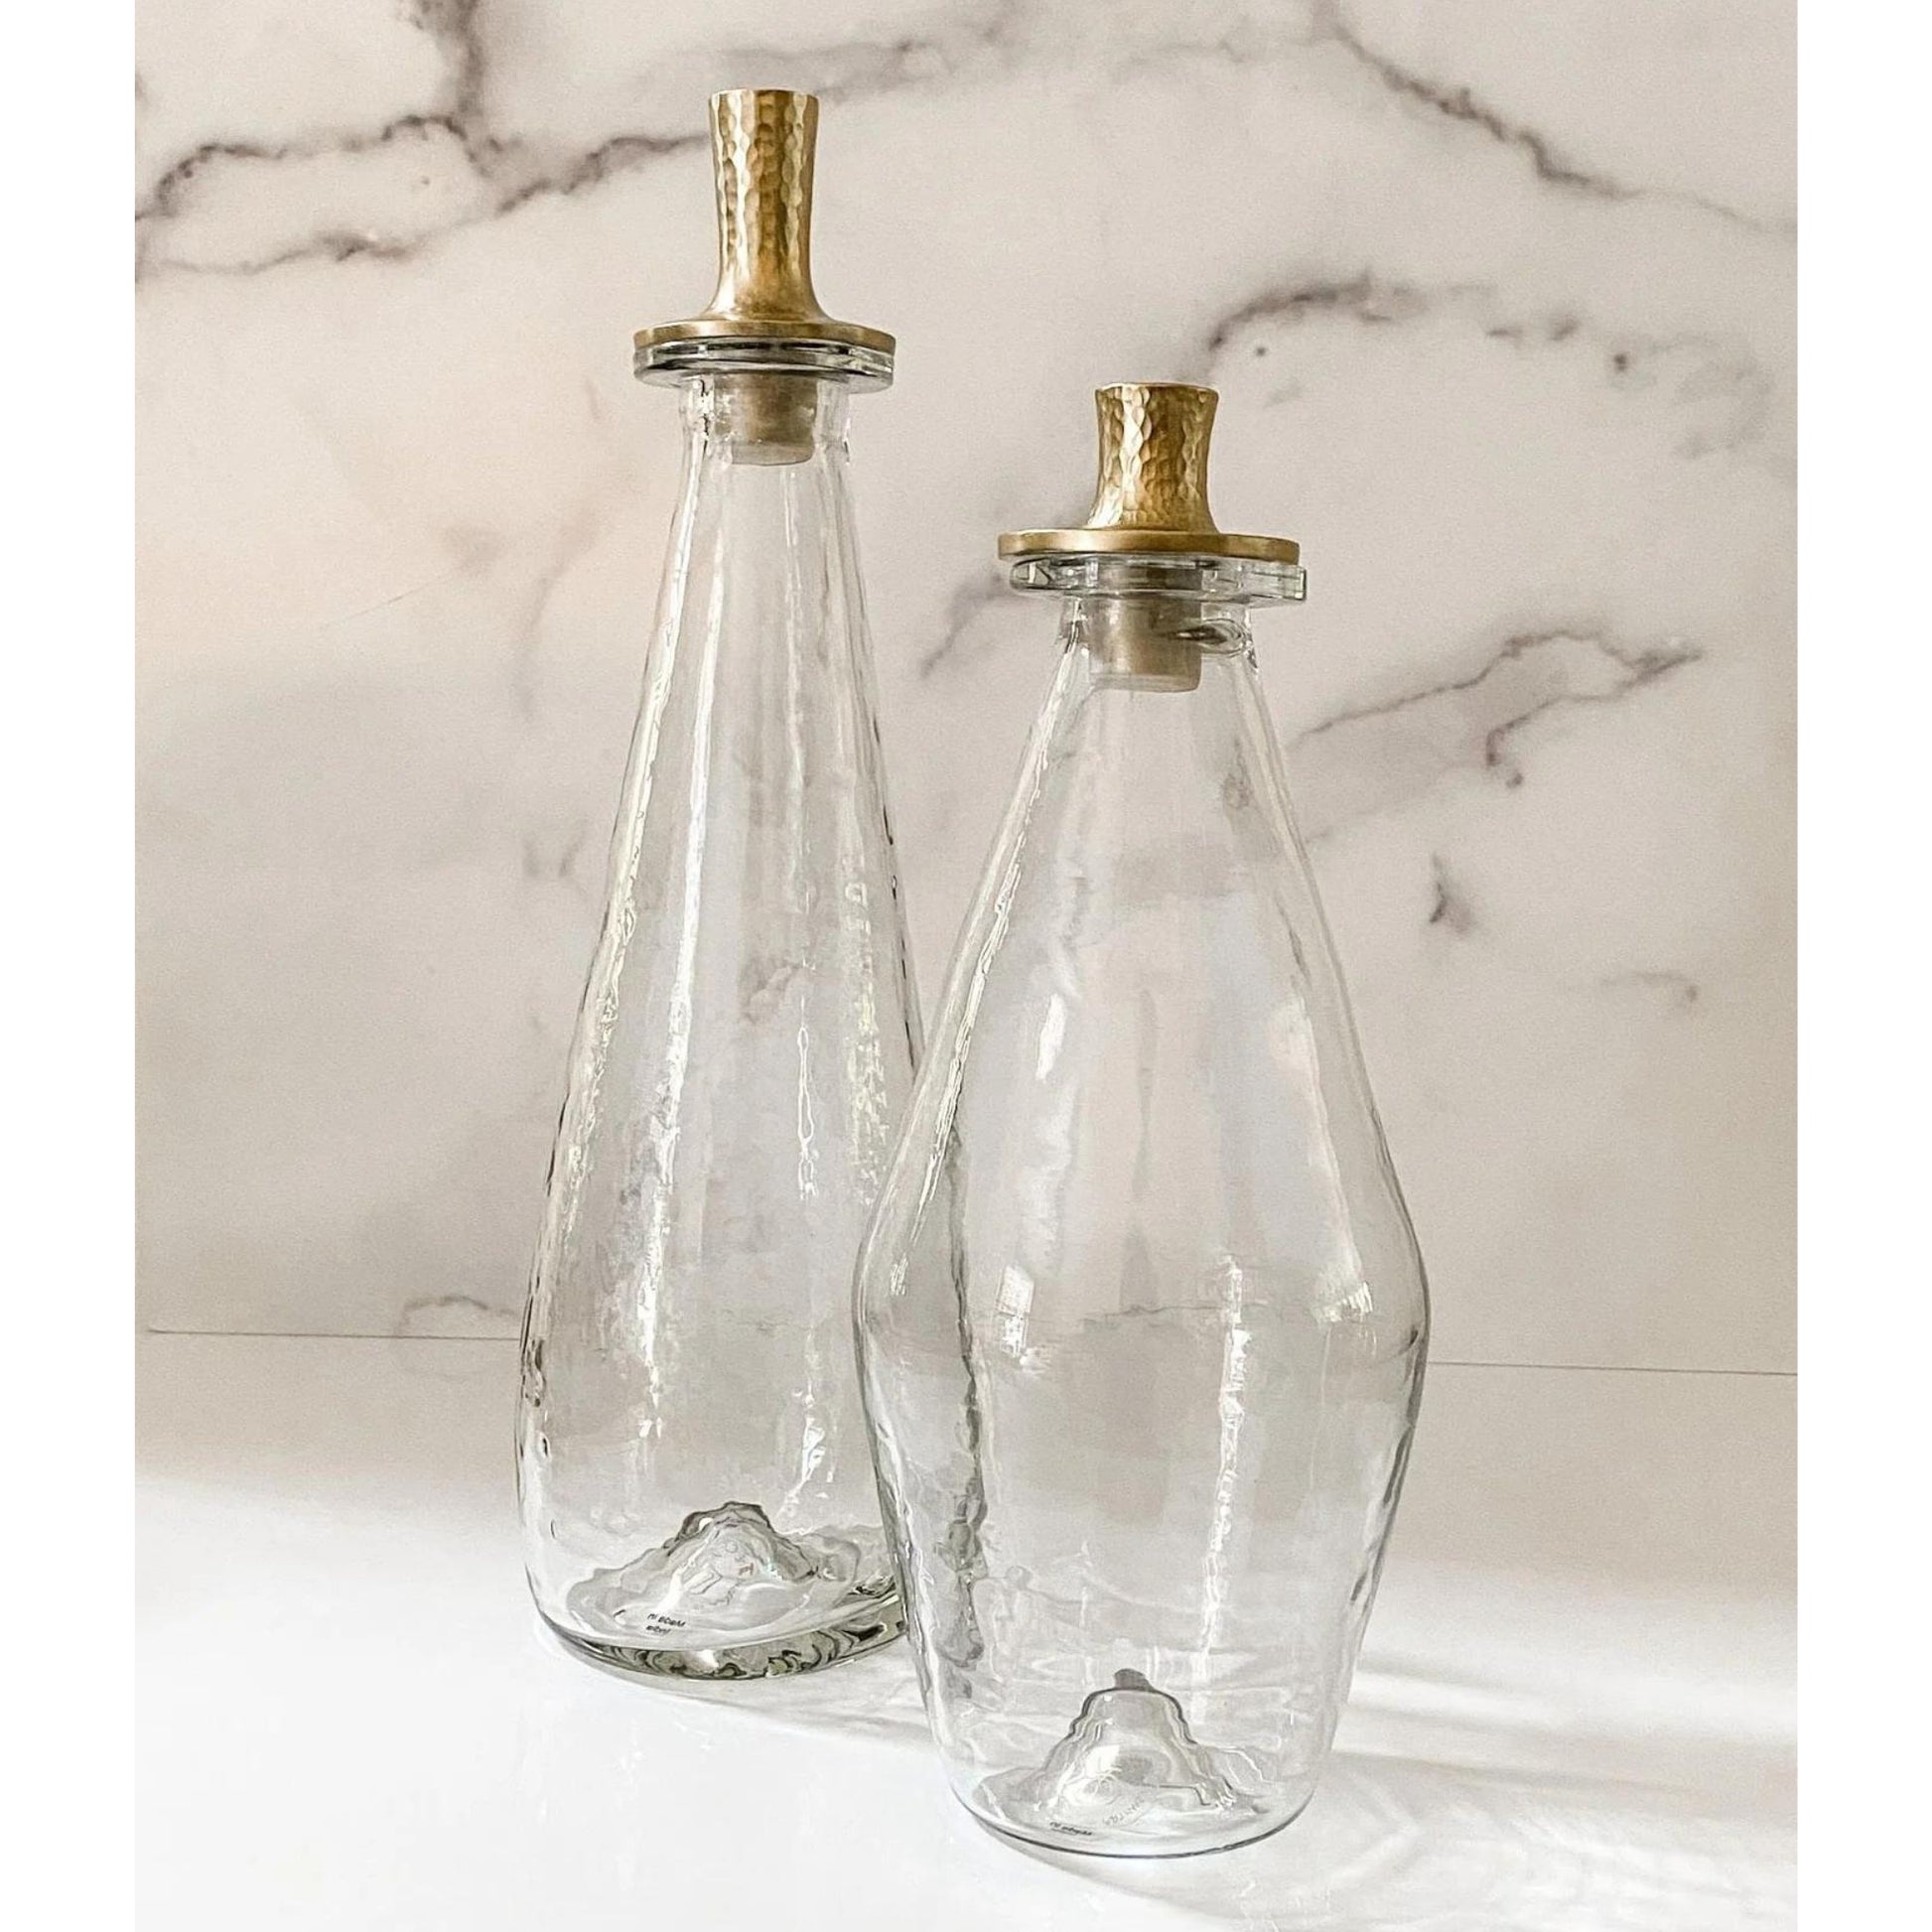 PEBBLED GLASS DECANTERS